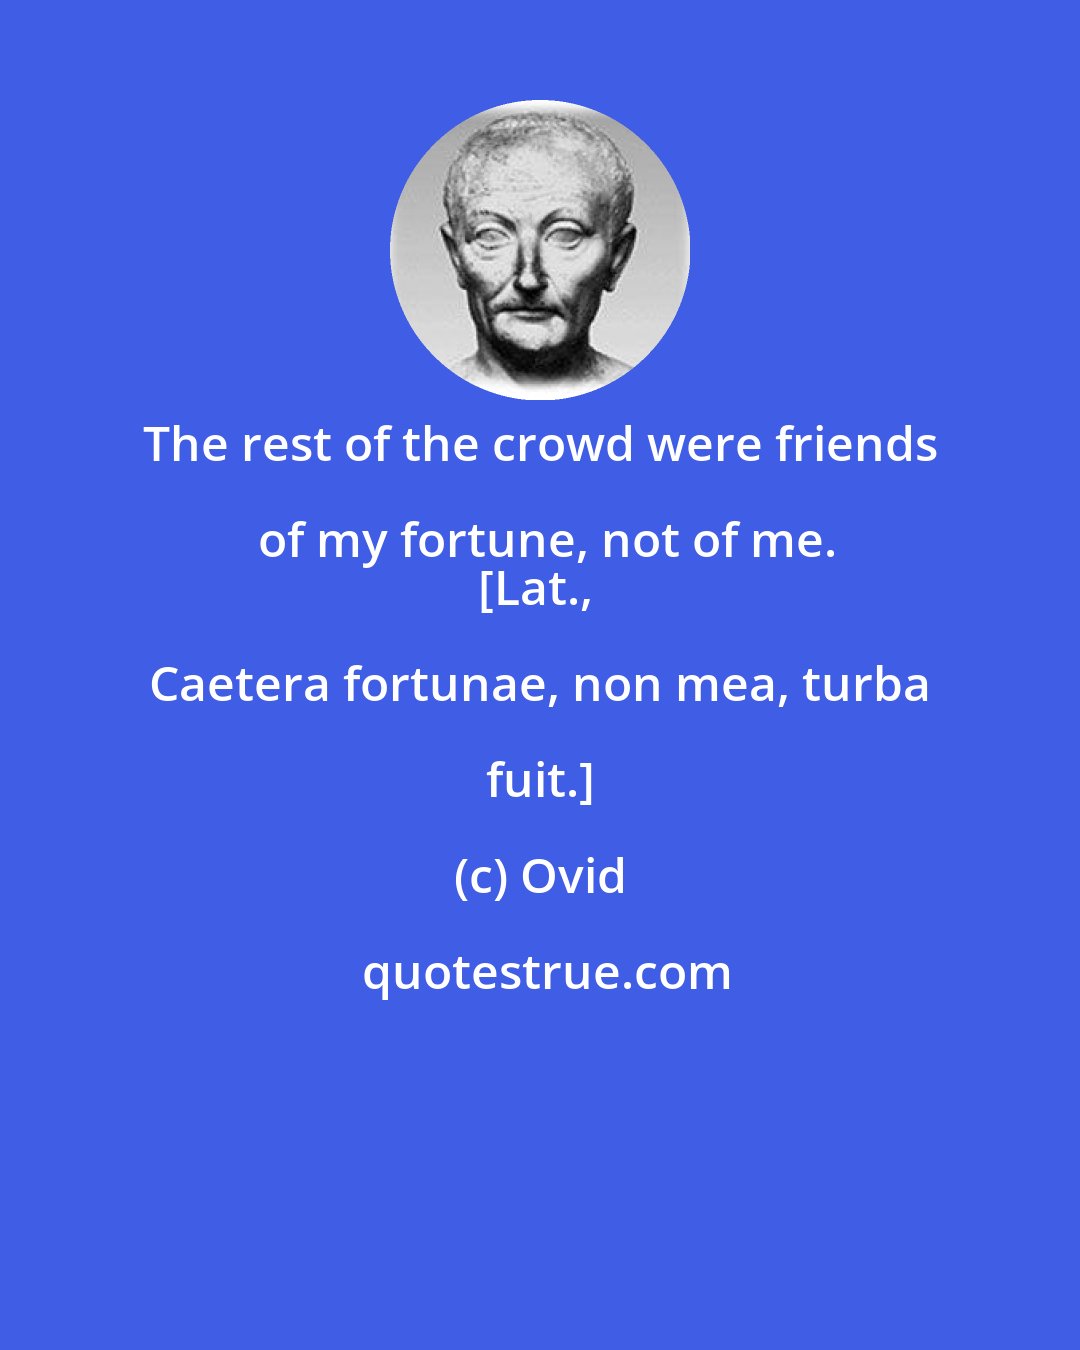 Ovid: The rest of the crowd were friends of my fortune, not of me.
[Lat., Caetera fortunae, non mea, turba fuit.]